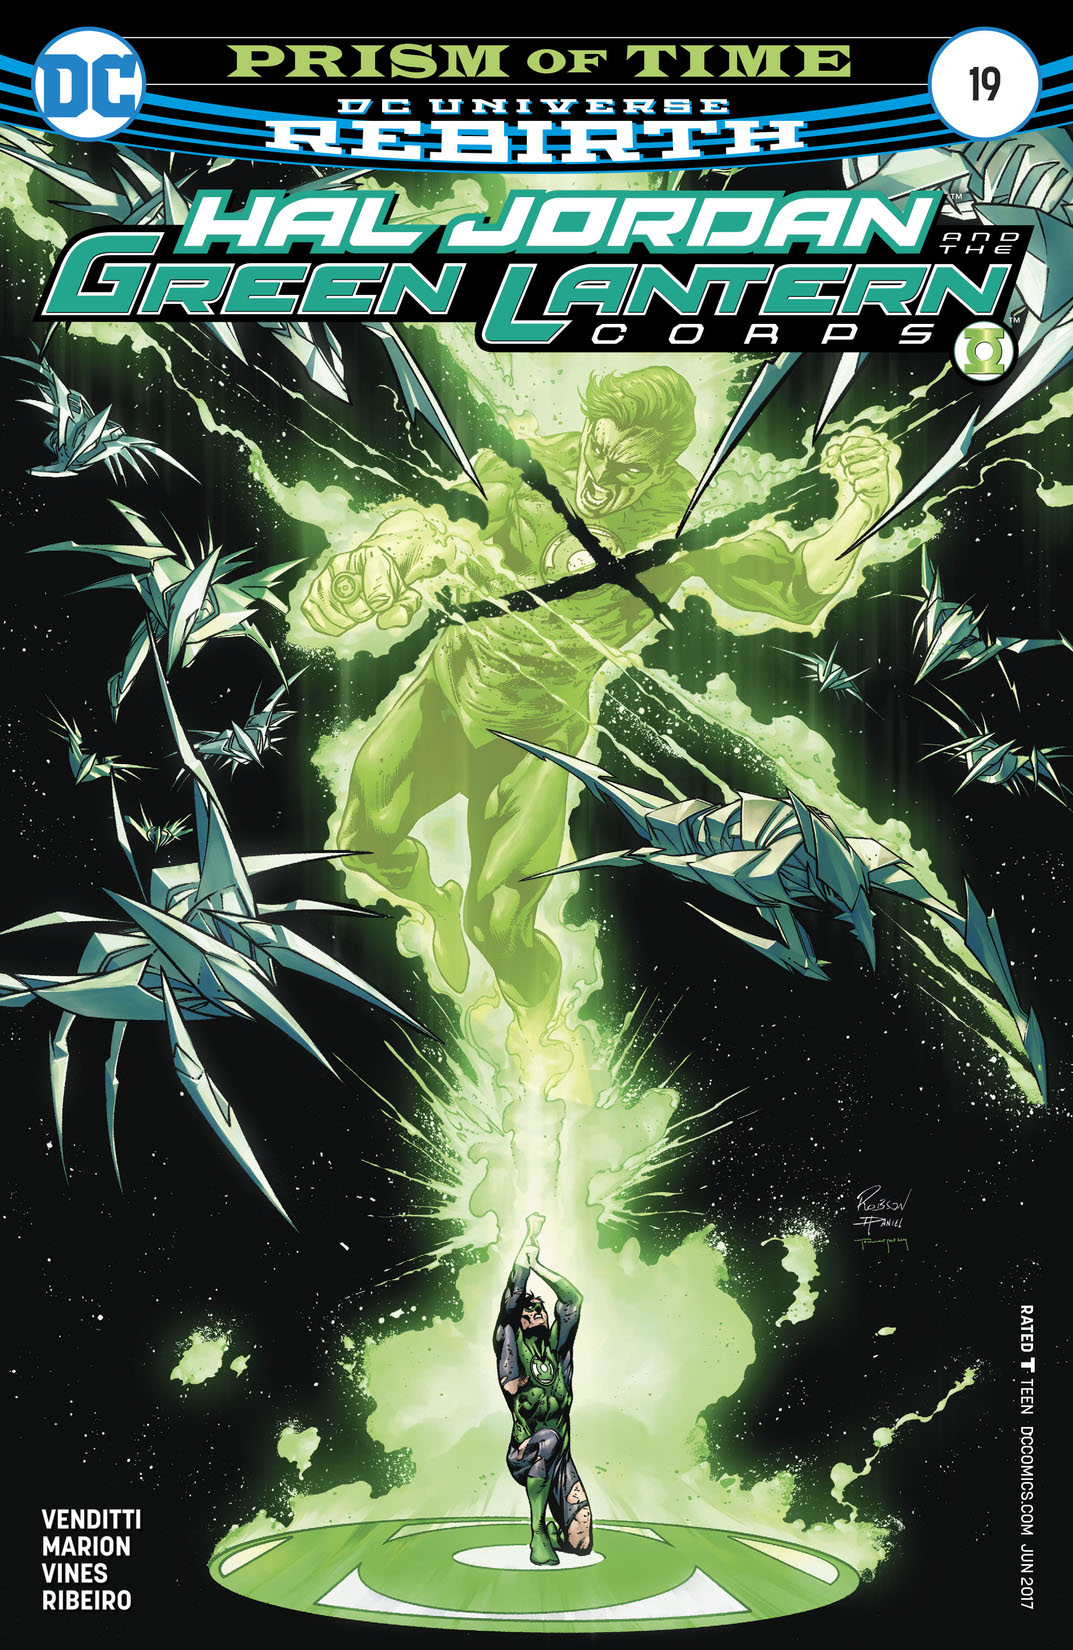 Hal Jordan and The Green Lantern Corps #19 preview images